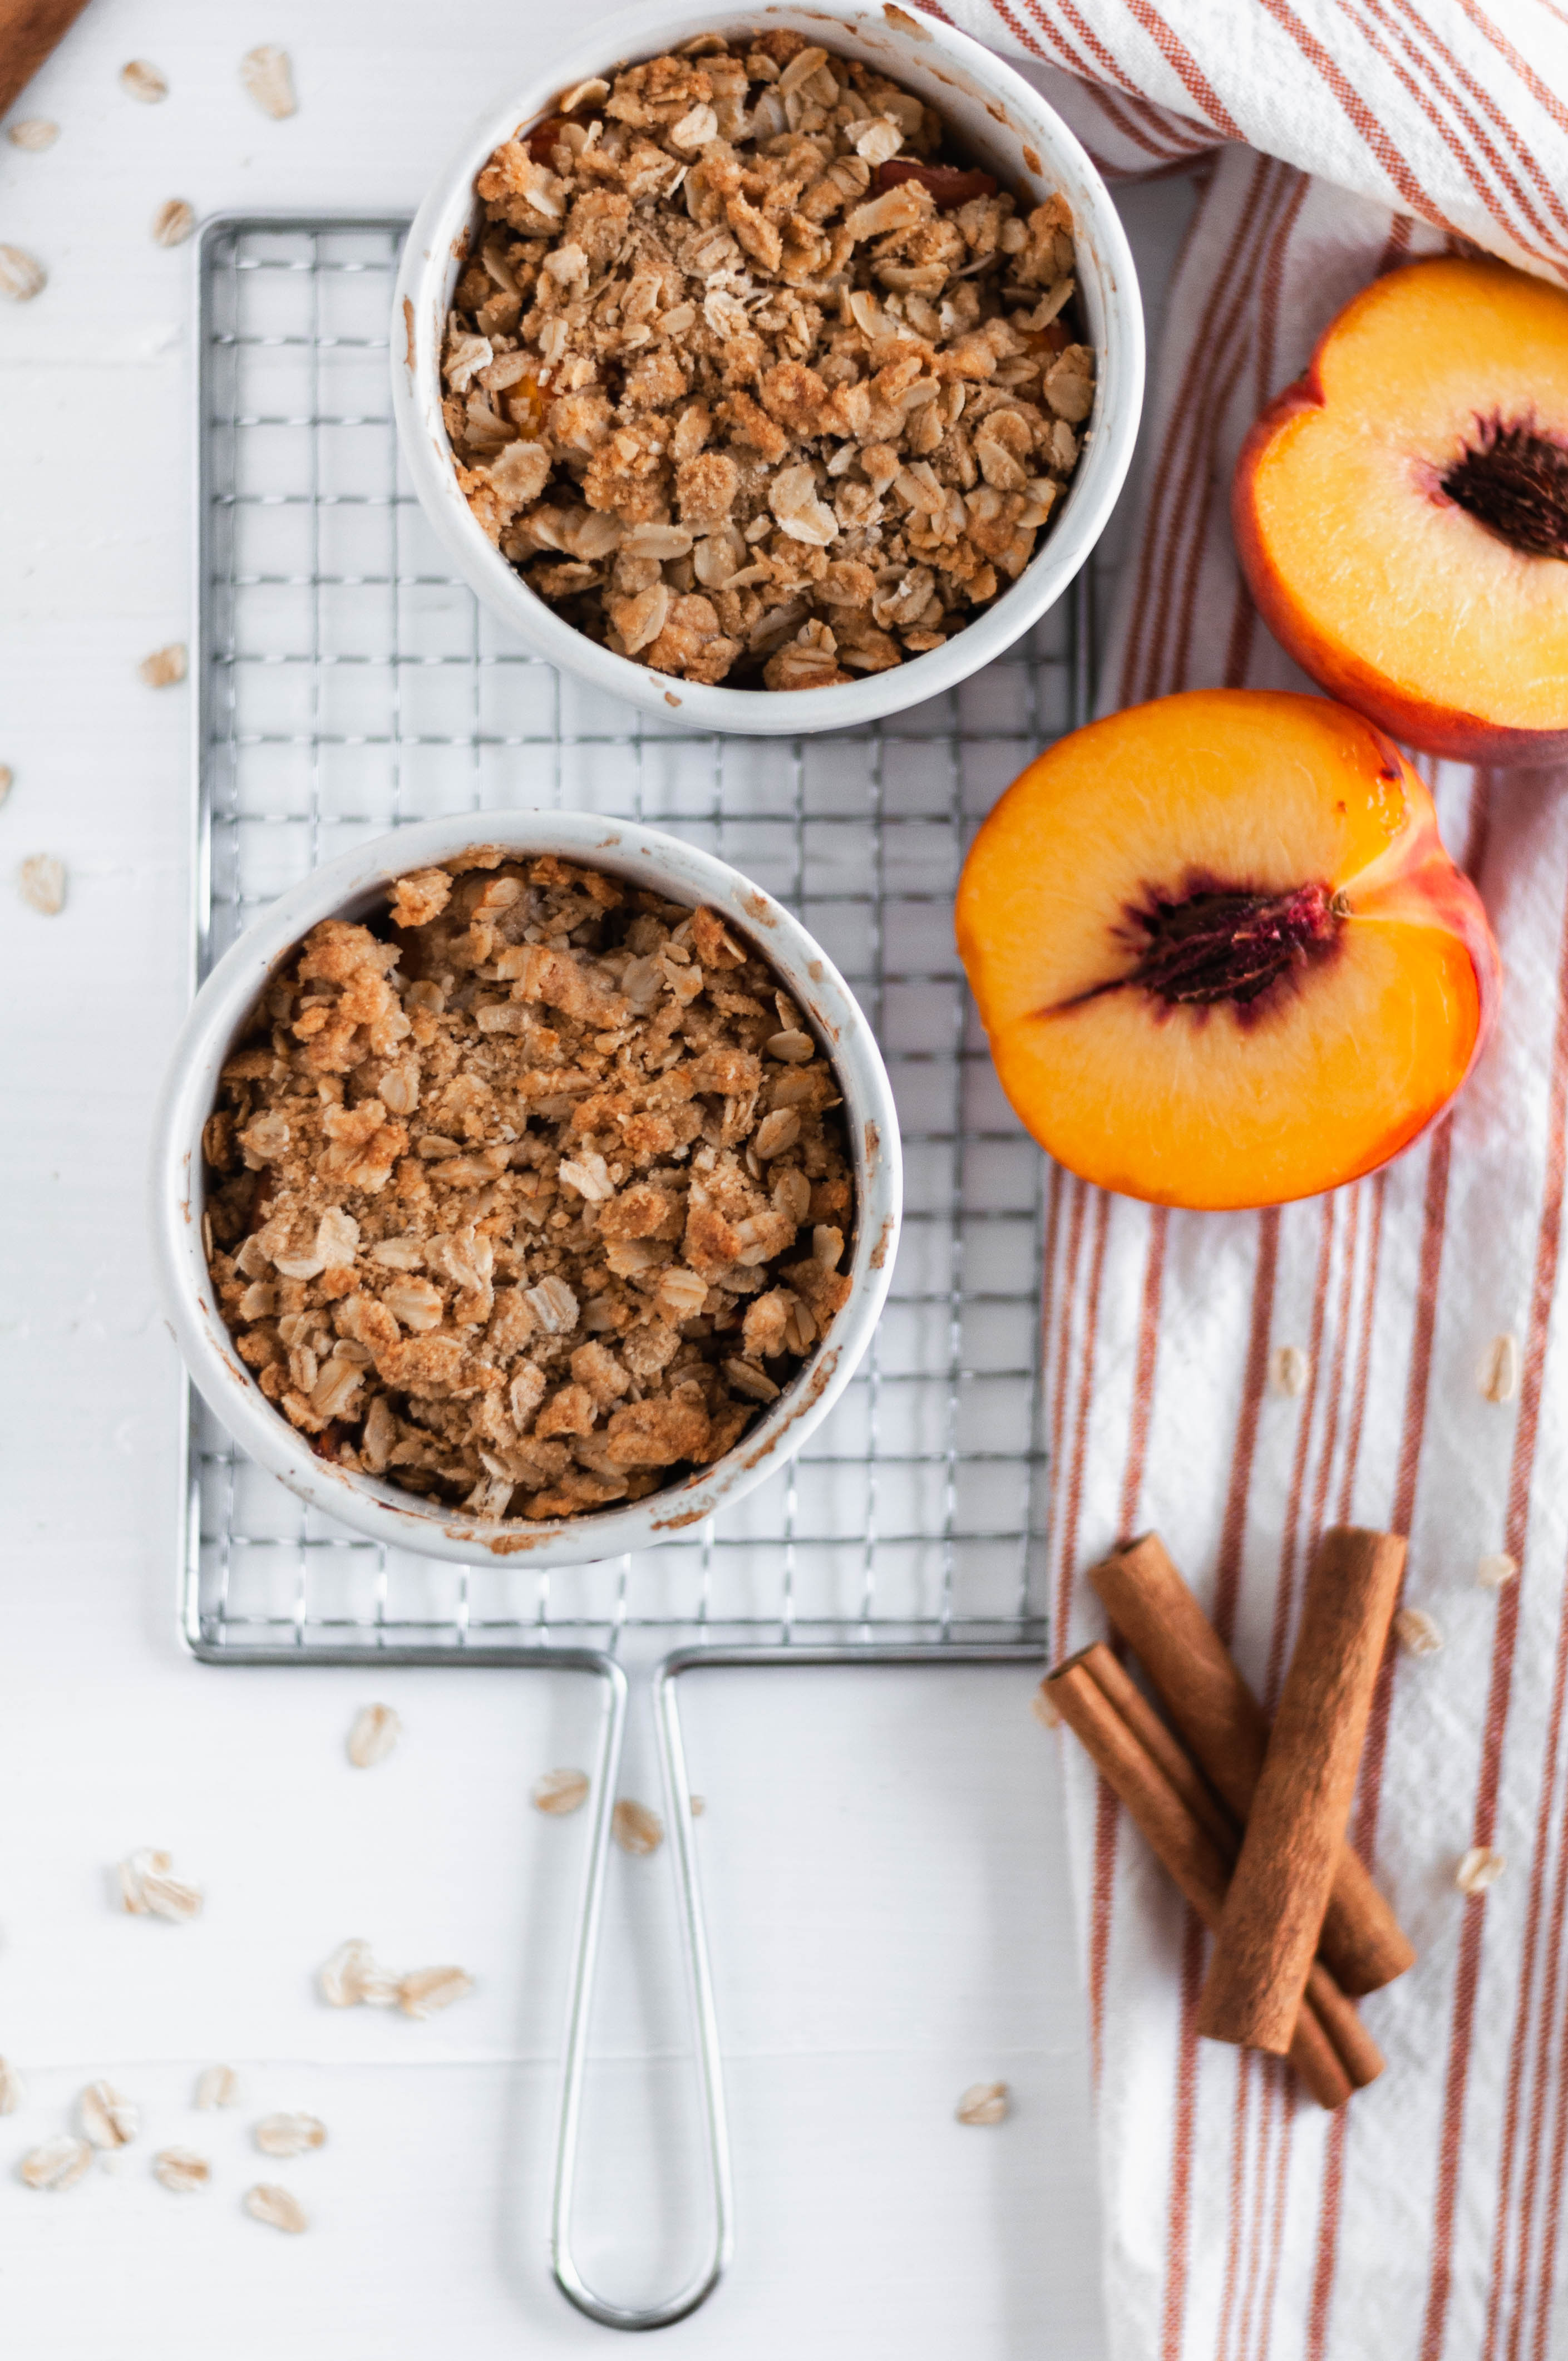 Feed that sweet tooth with just the right amount with this Small Batch Peach Crisp recipe. It makes two mini desserts and they are made in 45 minutes from start to finish.